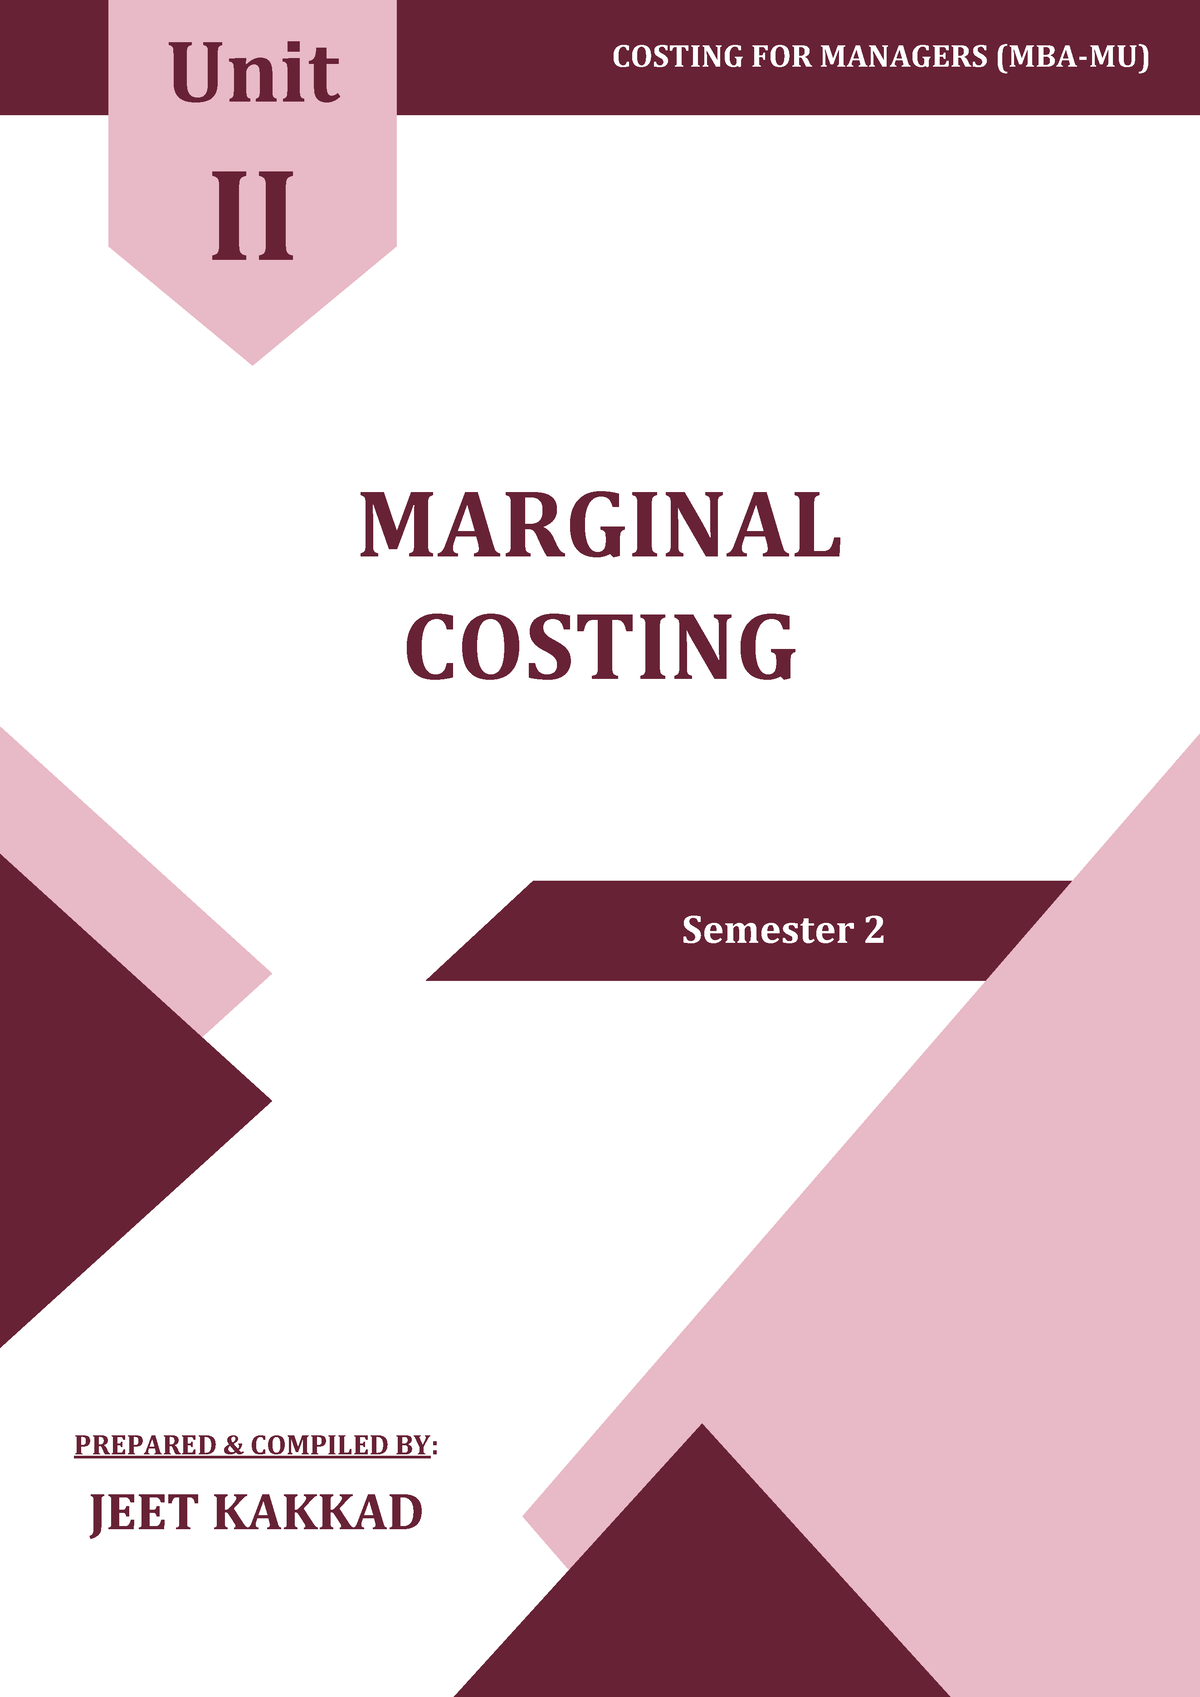 Unit-II - Marginal Costing - Semester 2 COSTING FOR MANAGERS (MBA-MU ...